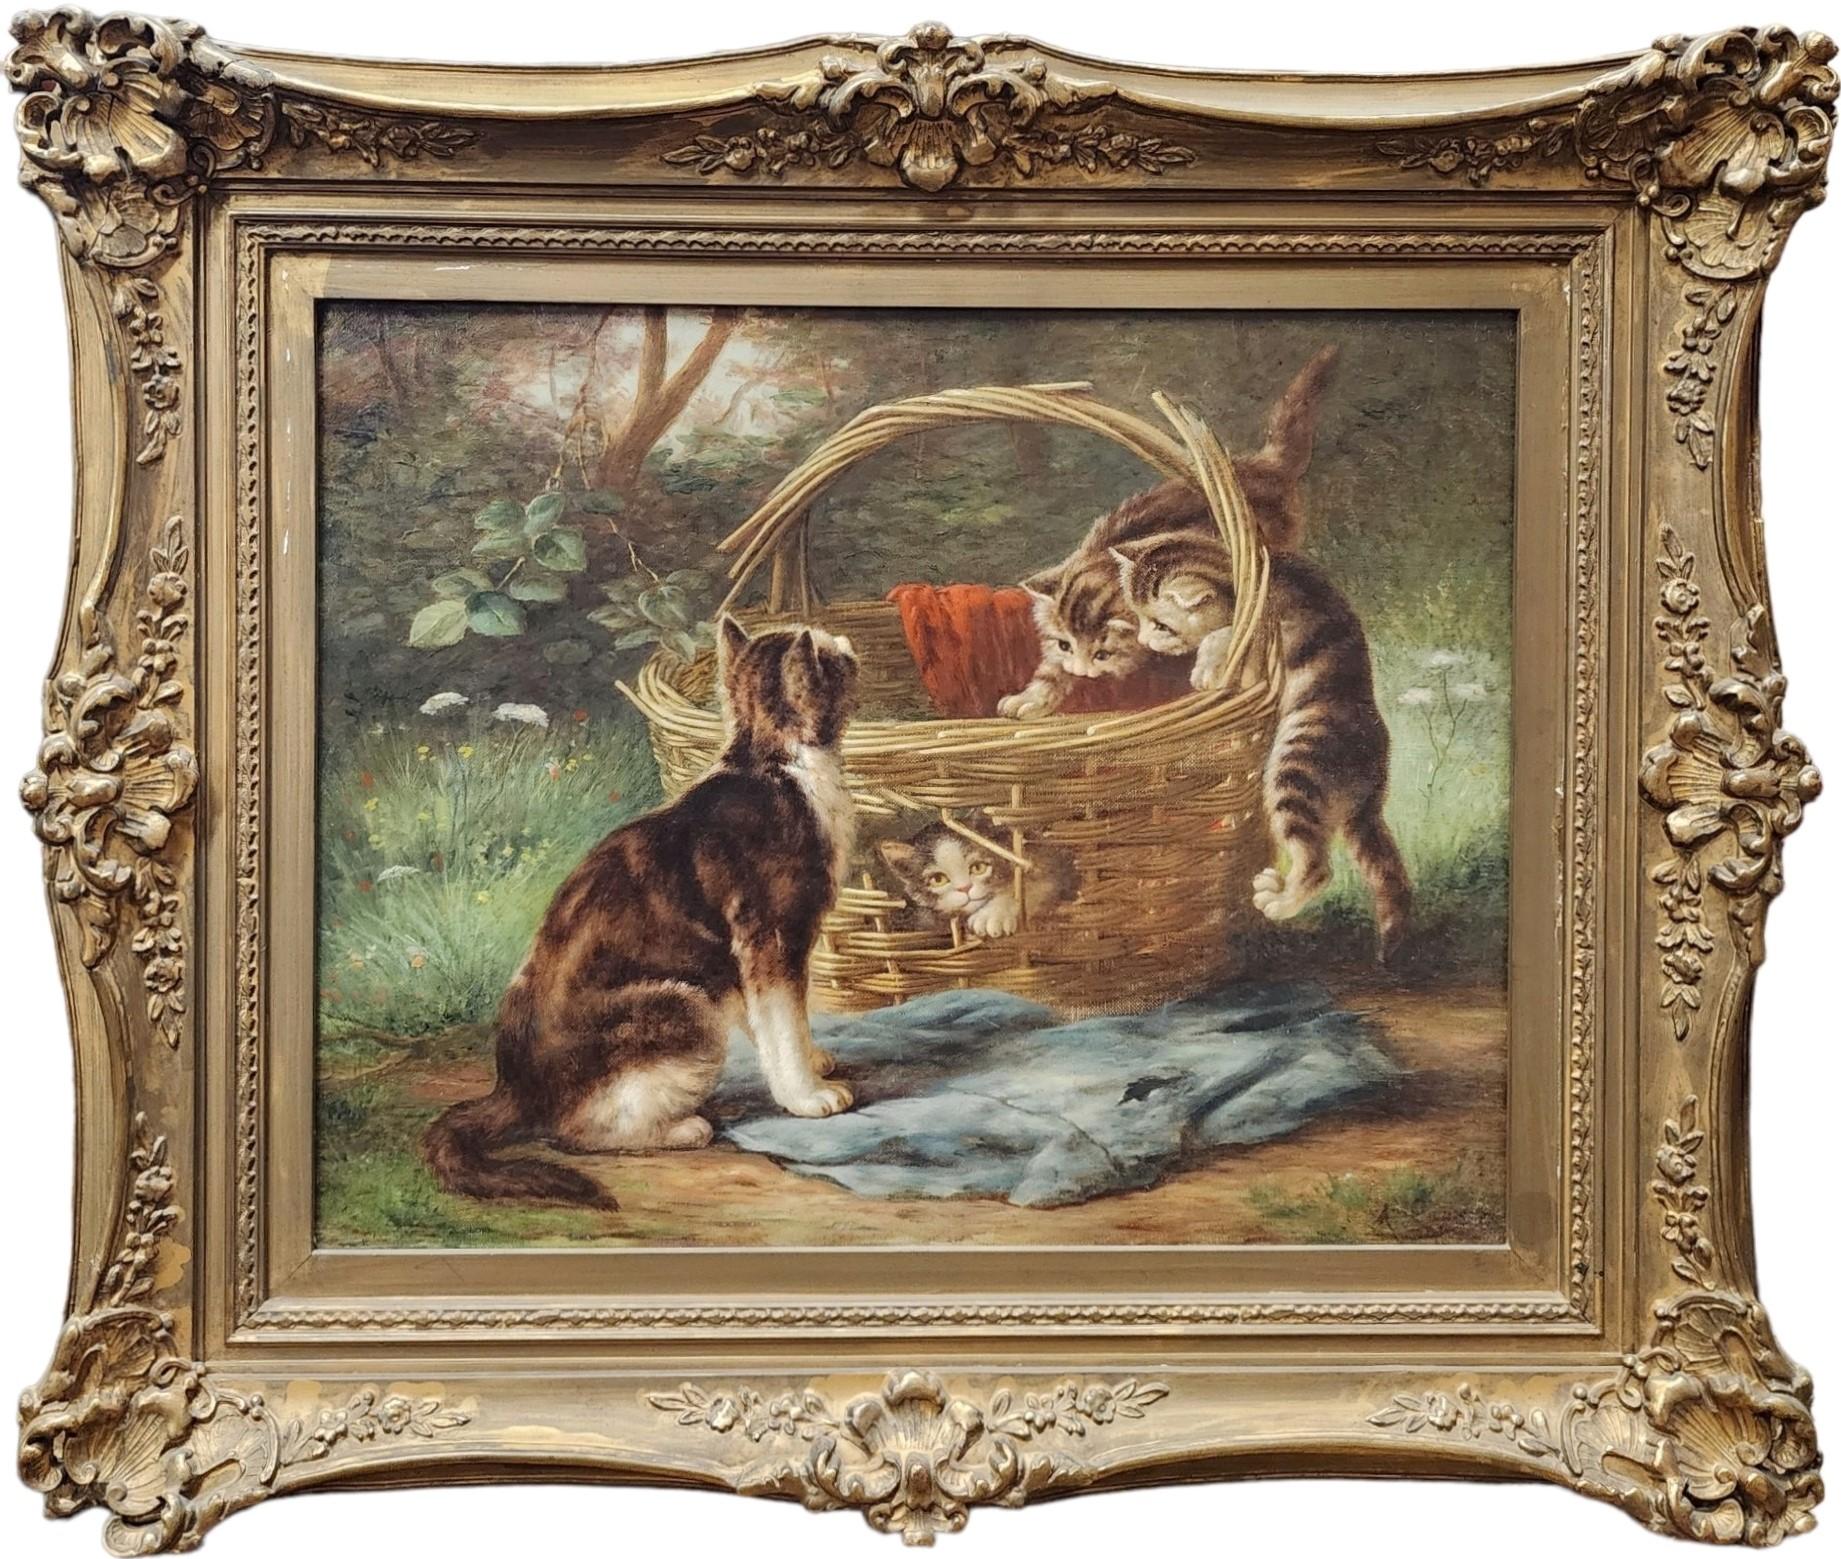 Animal Painting August Laux - Hide and Seek, 1880 Huile sur toile, Kittens in Basket, Cats, Cat, Kitten, Pet